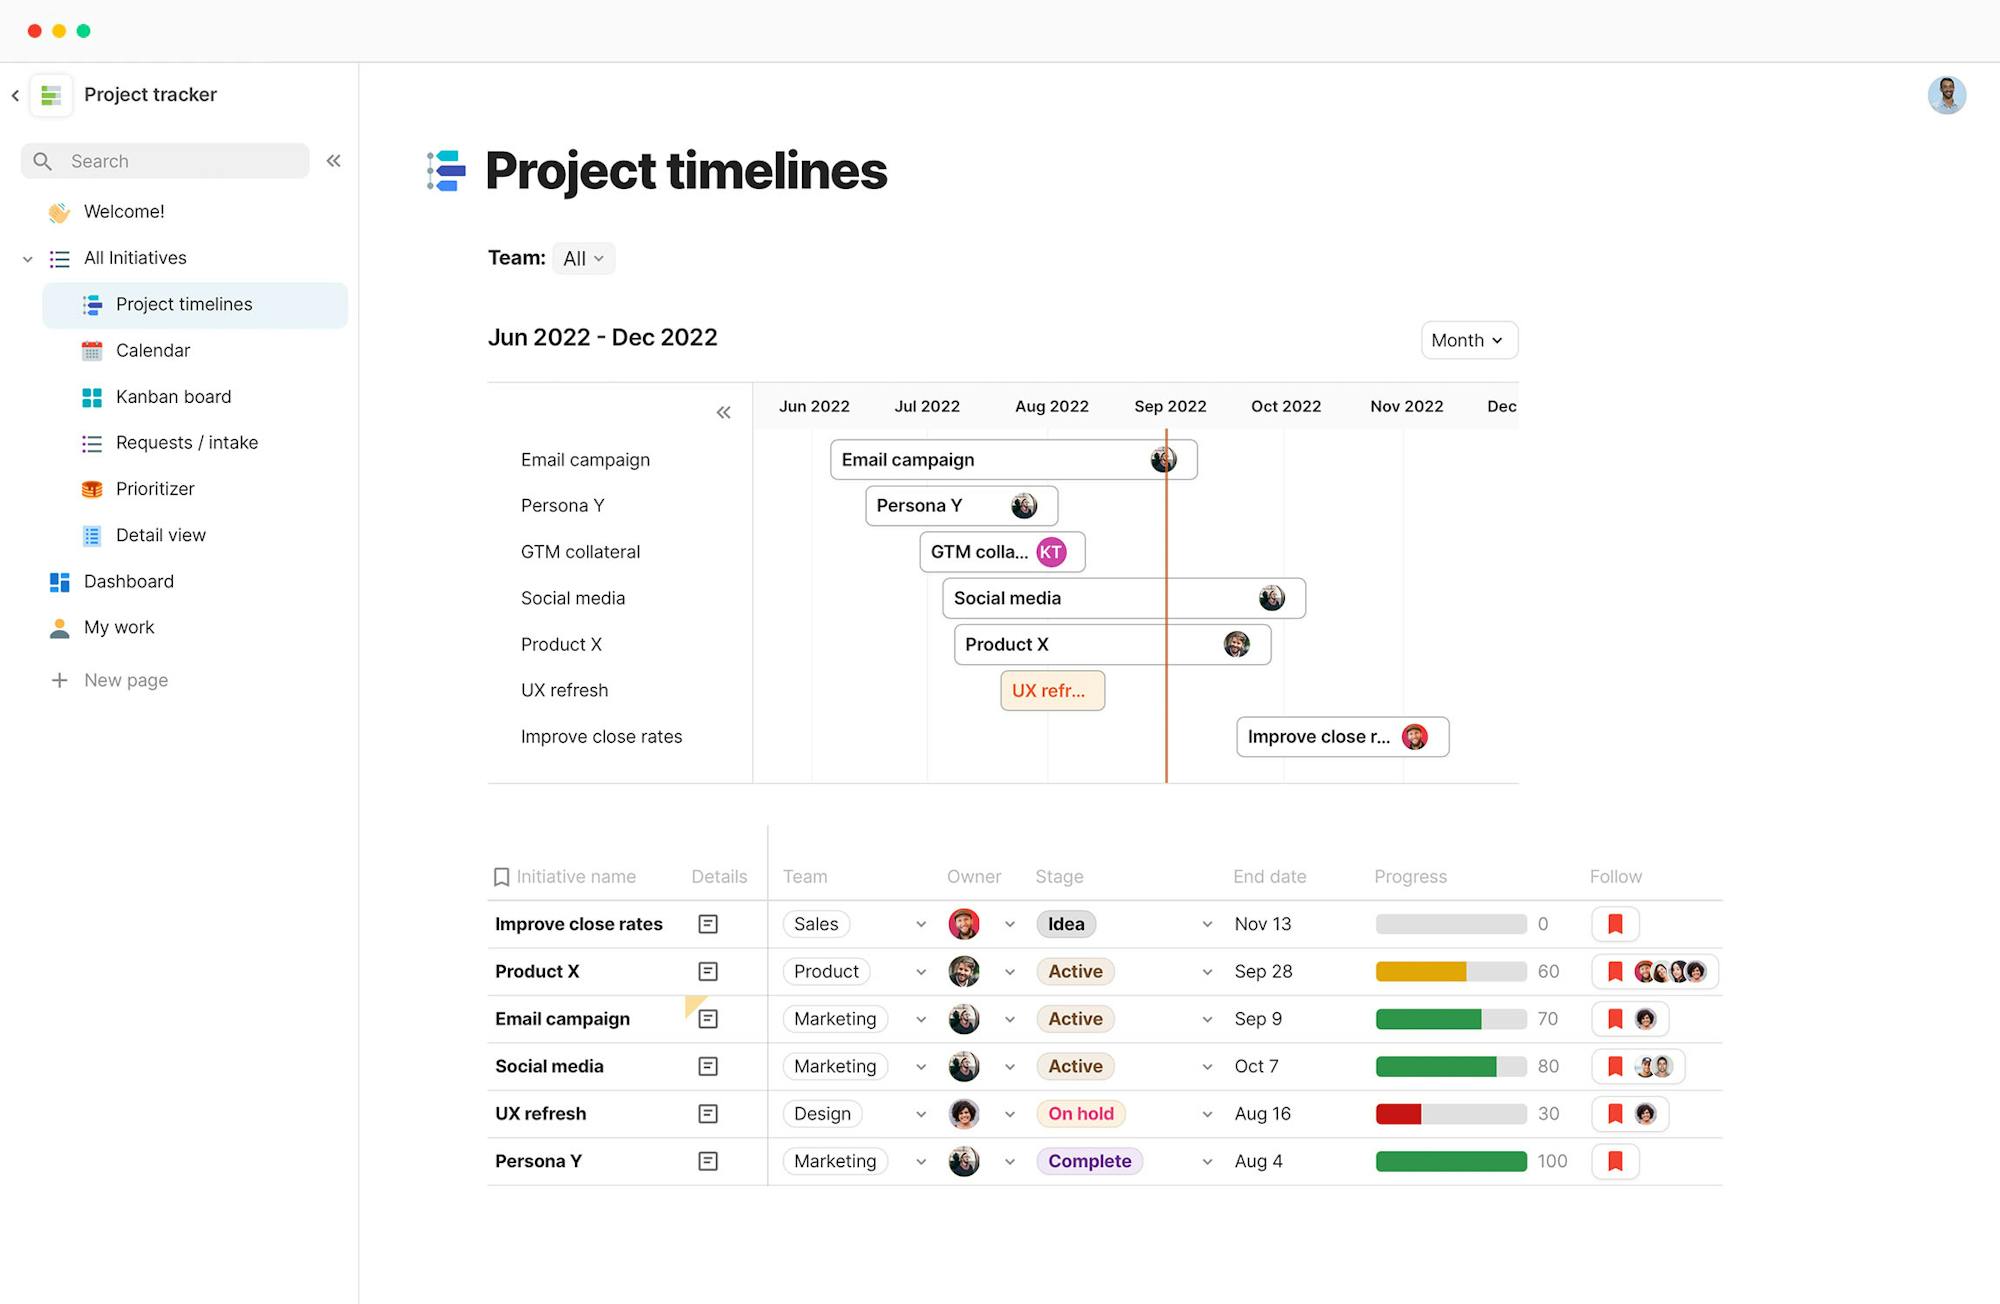 Project timeline in Coda - example timeline of project tasks by date